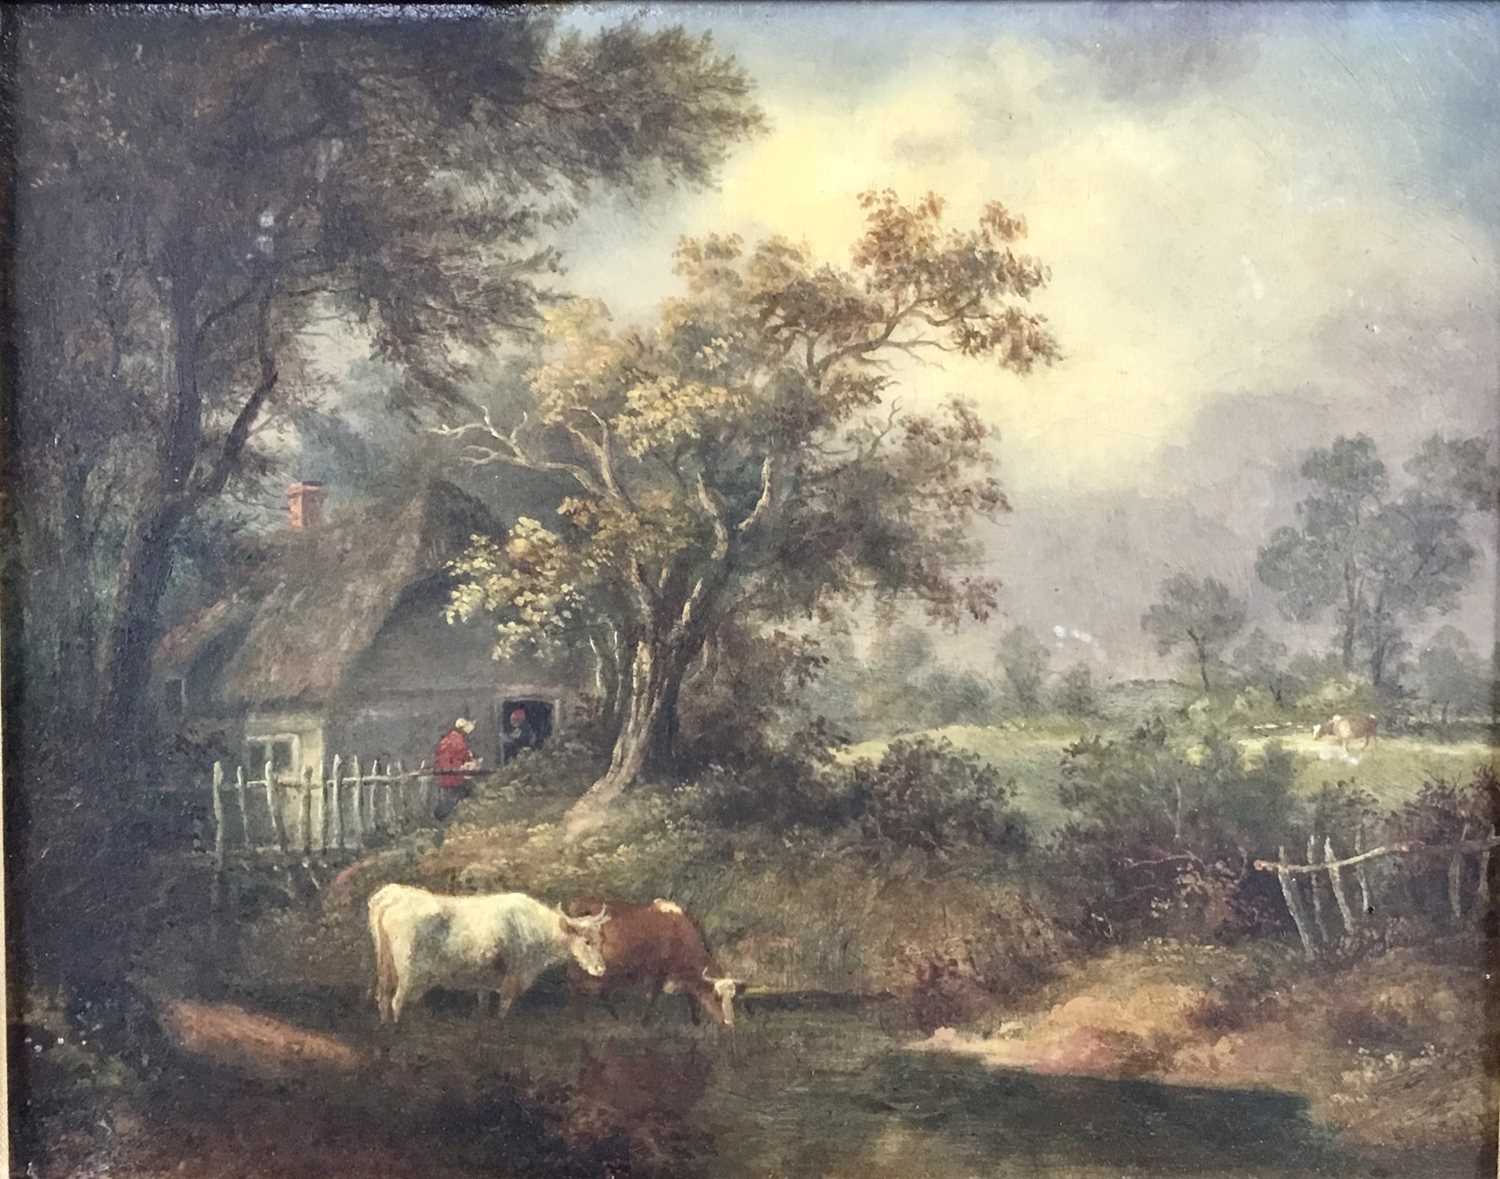 Lot 188 - English School, 19th century, oil on panel - cattle watering beside a cottage, indistinctly inscribed verso, in gilt frame